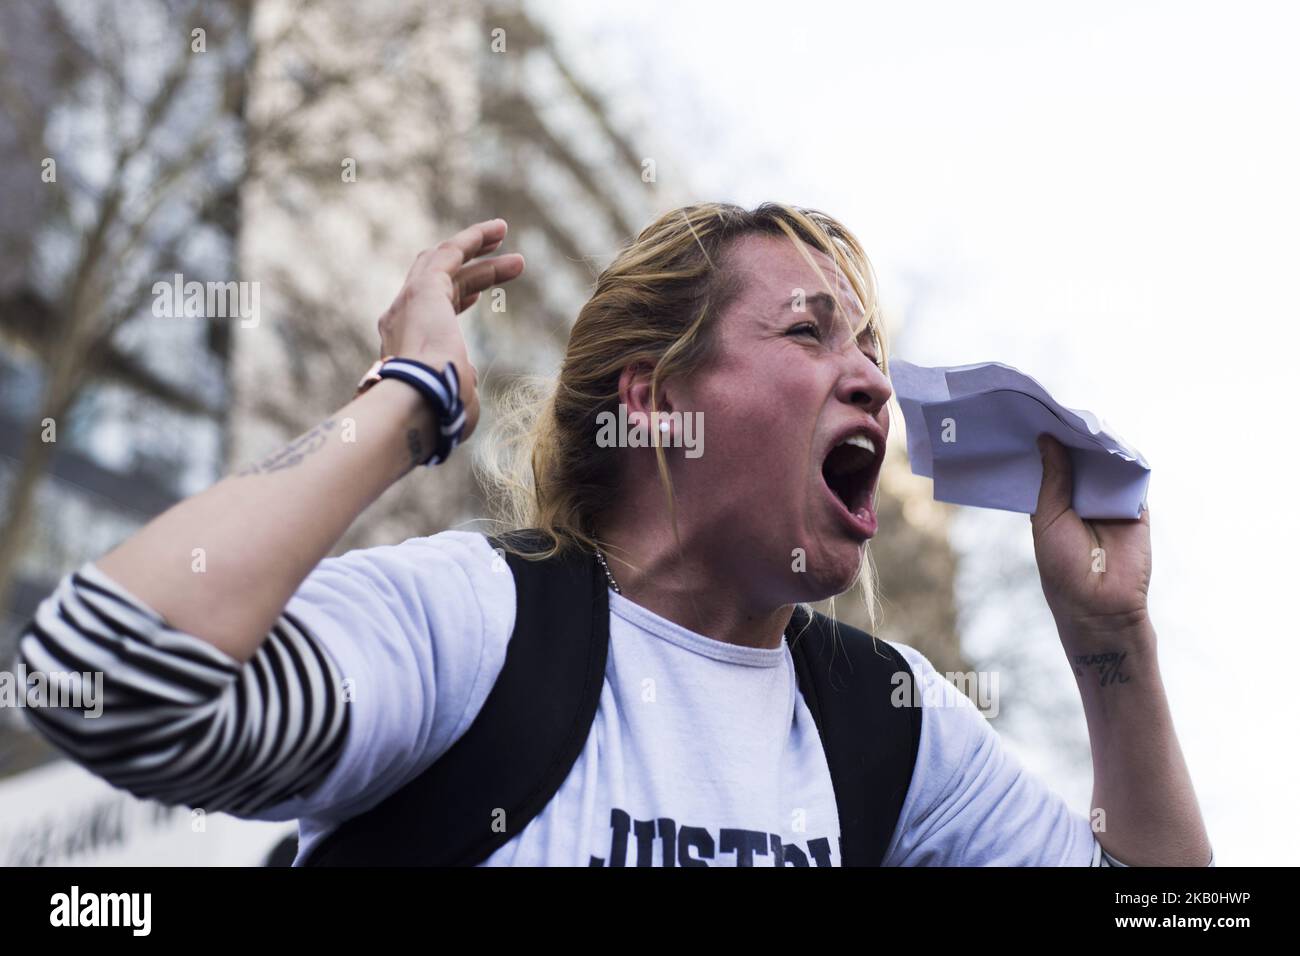 A woman shouts anti-goverment slogan during the fourth national protest against 'gatillo fÃ¡cil' and police repression in Buenos Aires, Argentina on August 27 2018. (Photo by Gala Abramovich/NurPhoto) Stock Photo